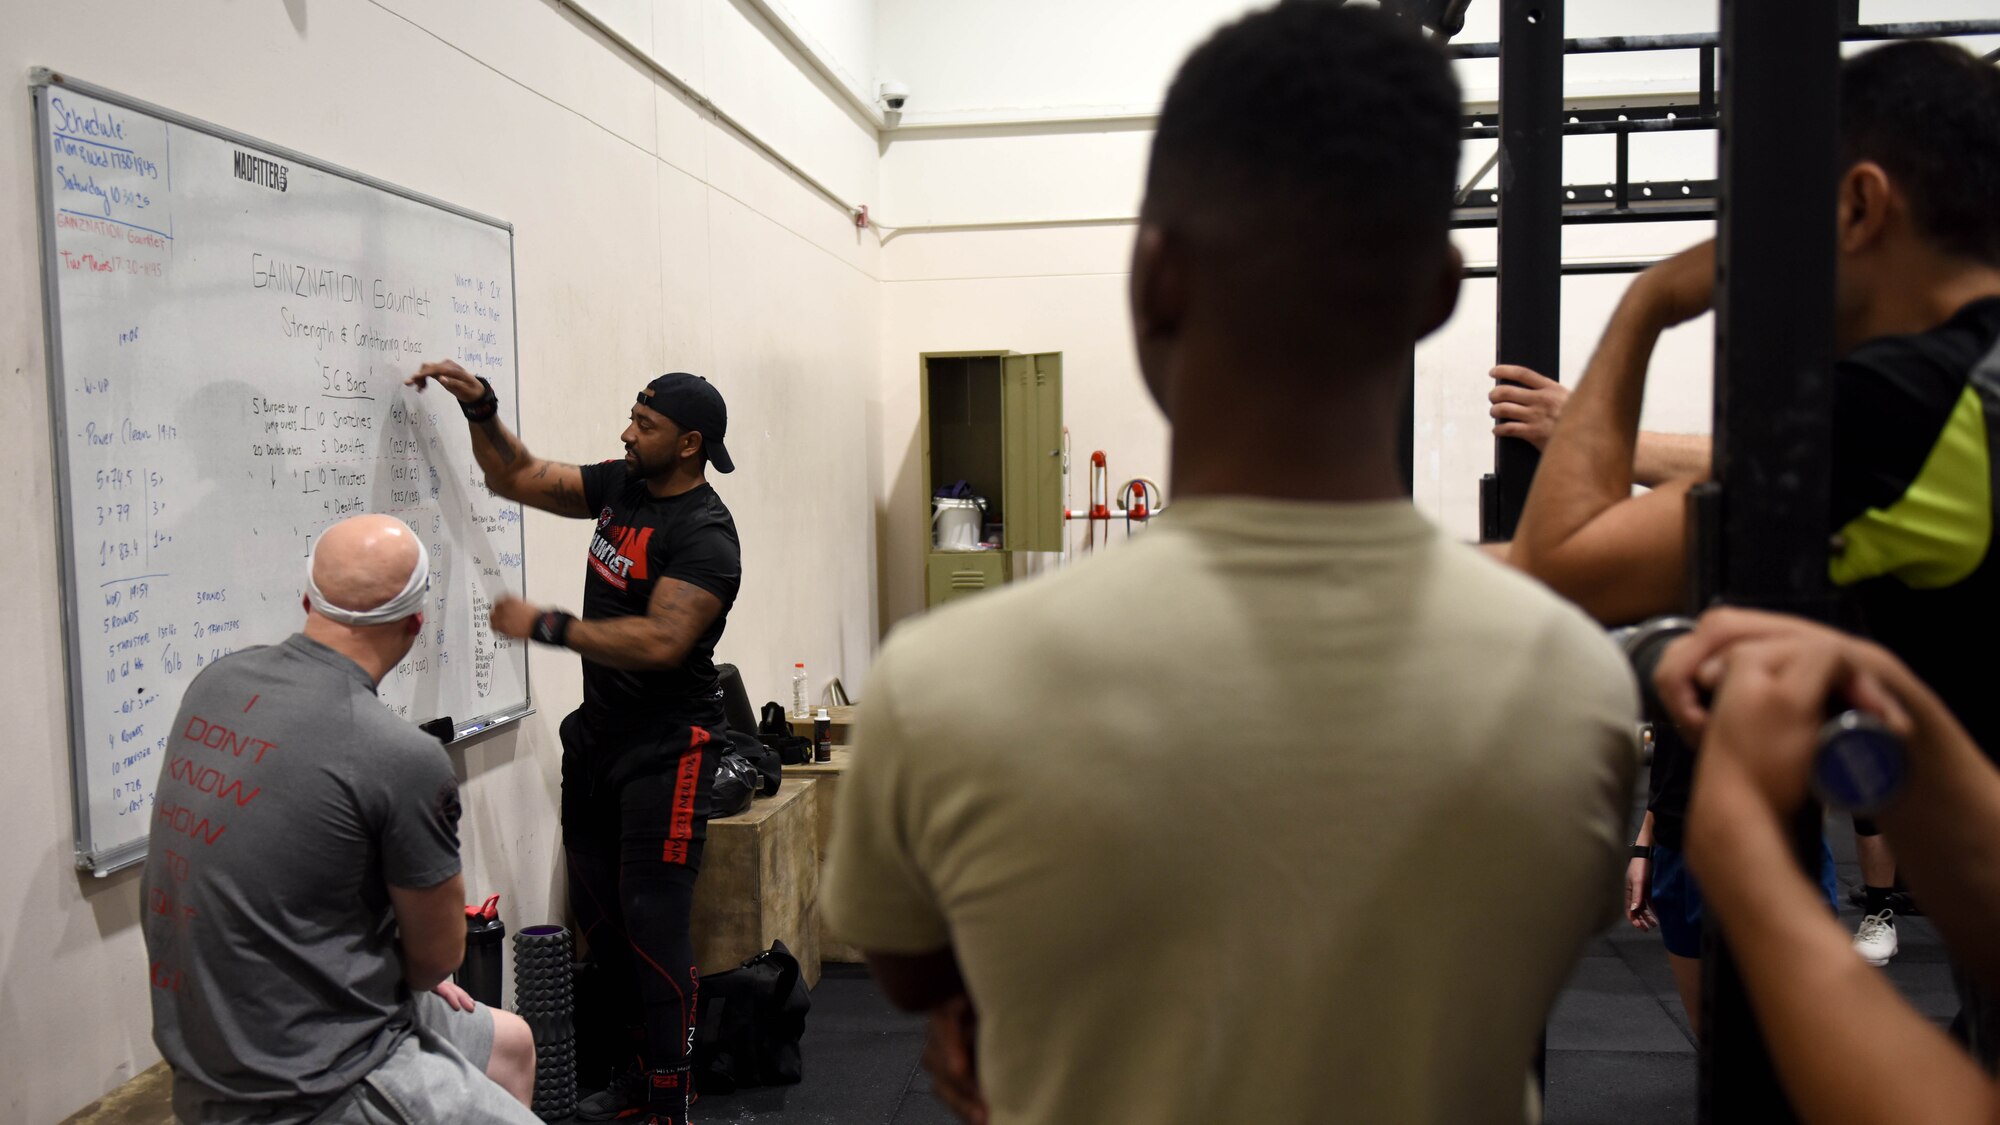 Staff Sgt. Corey Bryant, 39th Security Forces Squadron vault storage area supervisor, goes over a workout plan during his fitness class, at Incirlik Air Base, Turkey, Feb. 6, 2020.